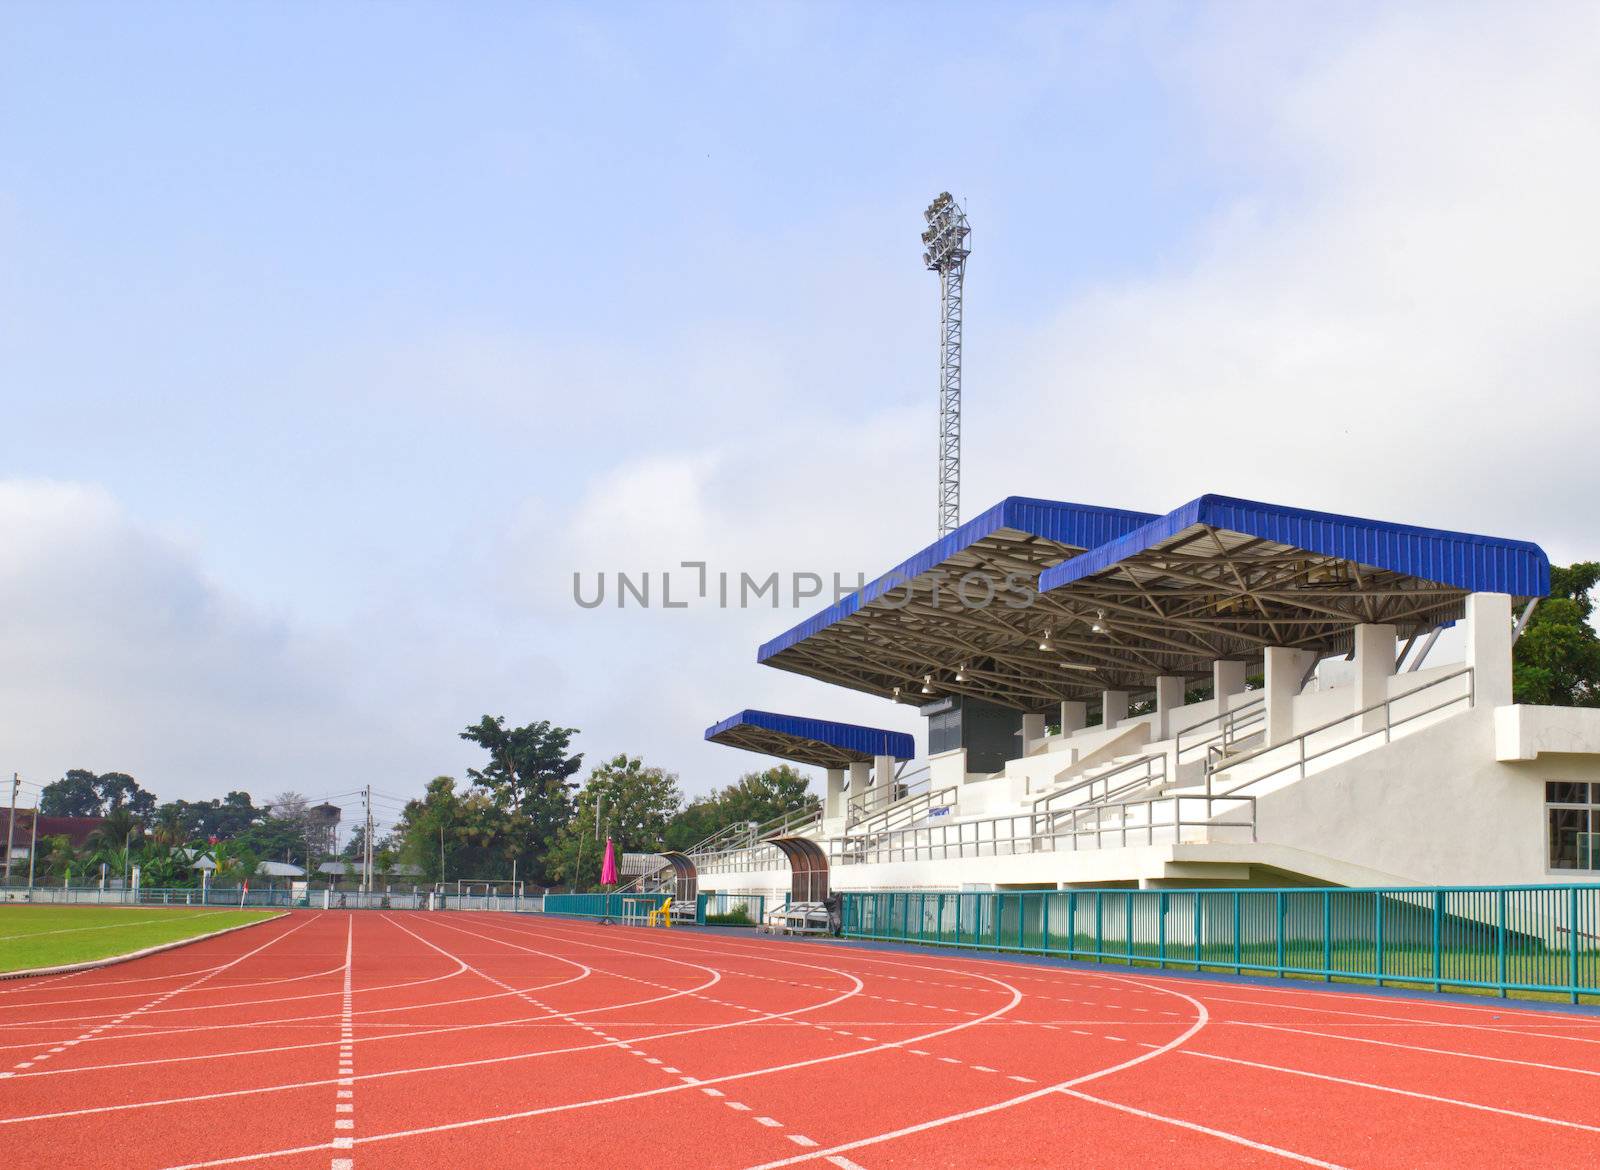 Stadium main stand and running track with blue sky background